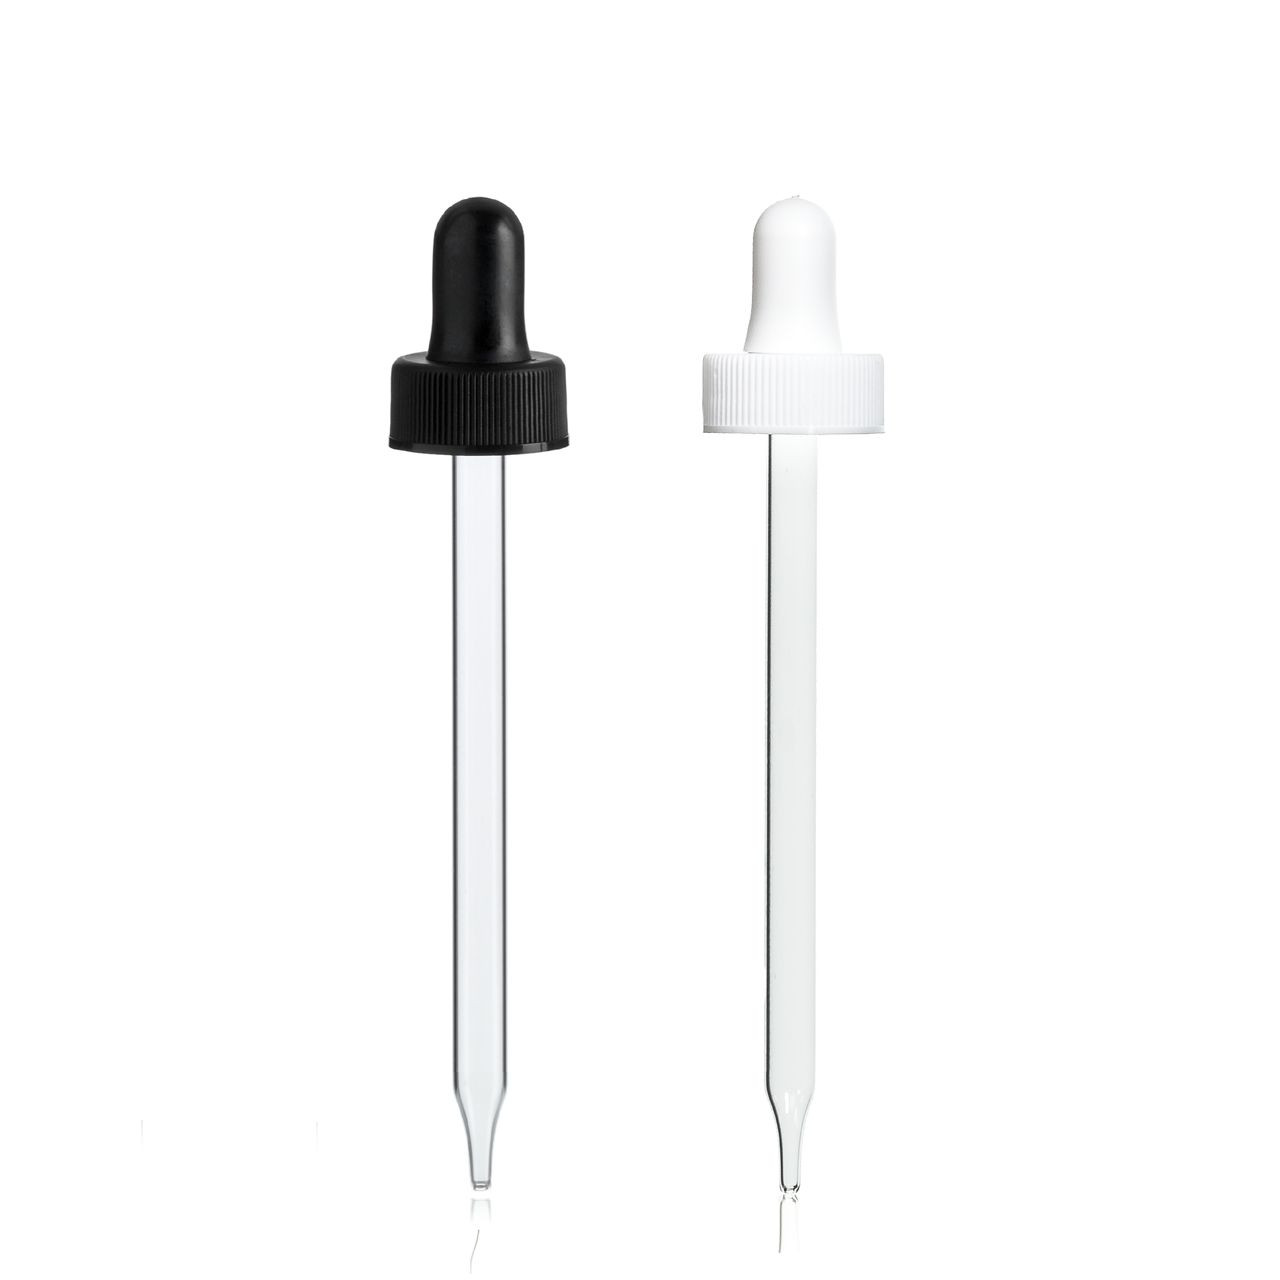 Curved Straight Glass Pipette Pipet Eye Liquid Droppers - Temu